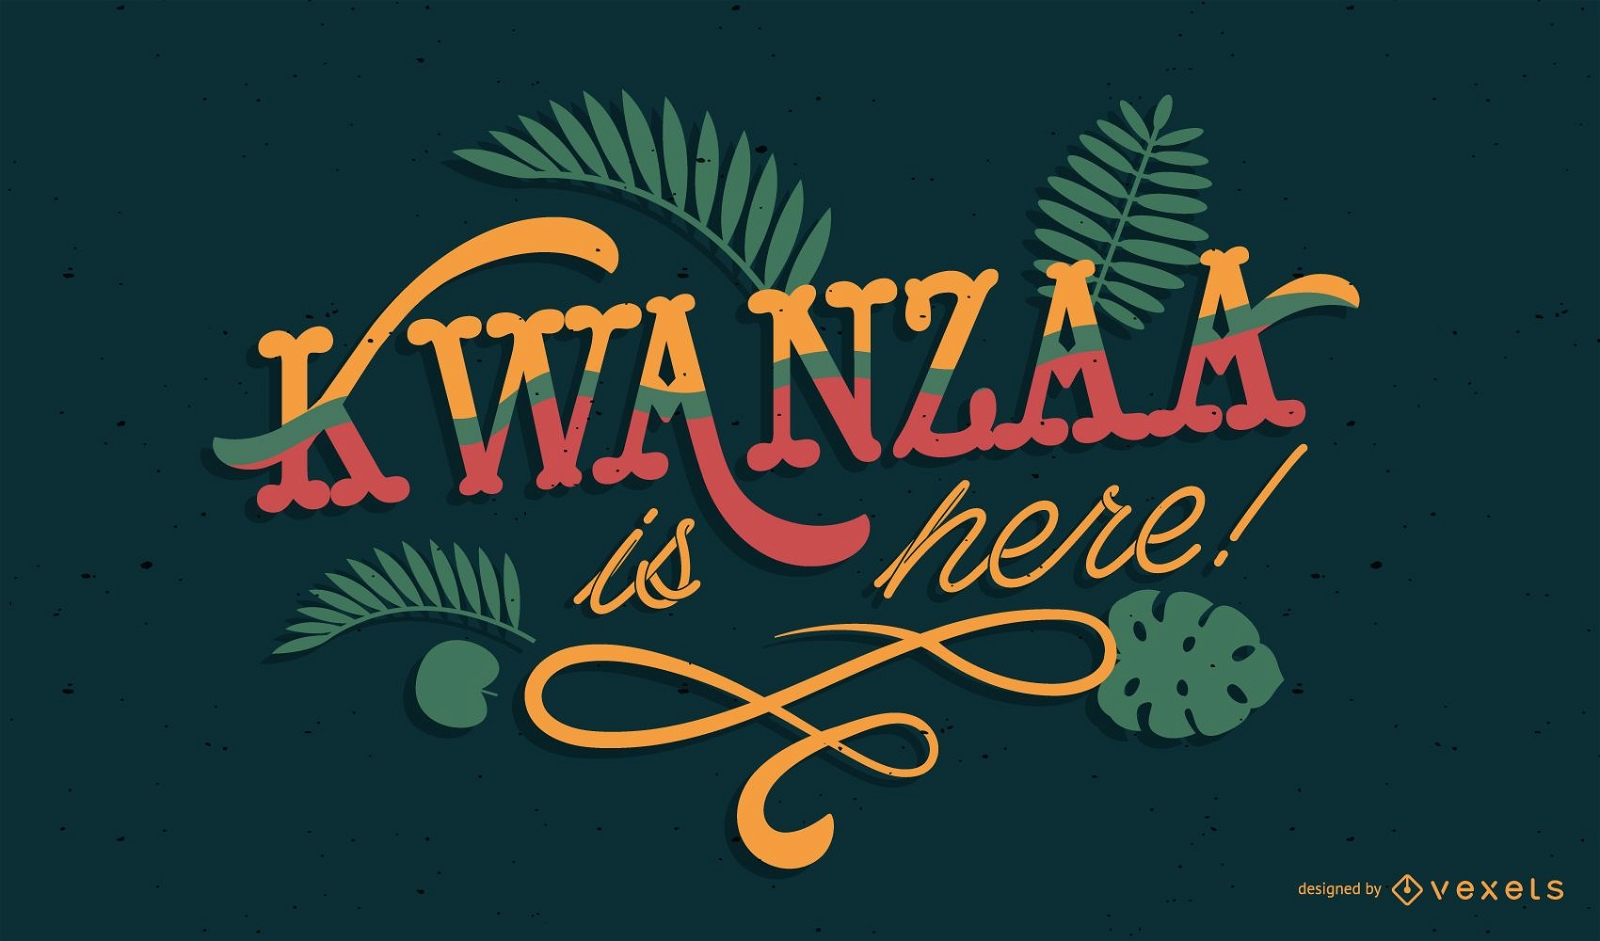 Kwanzaa is here lettering design